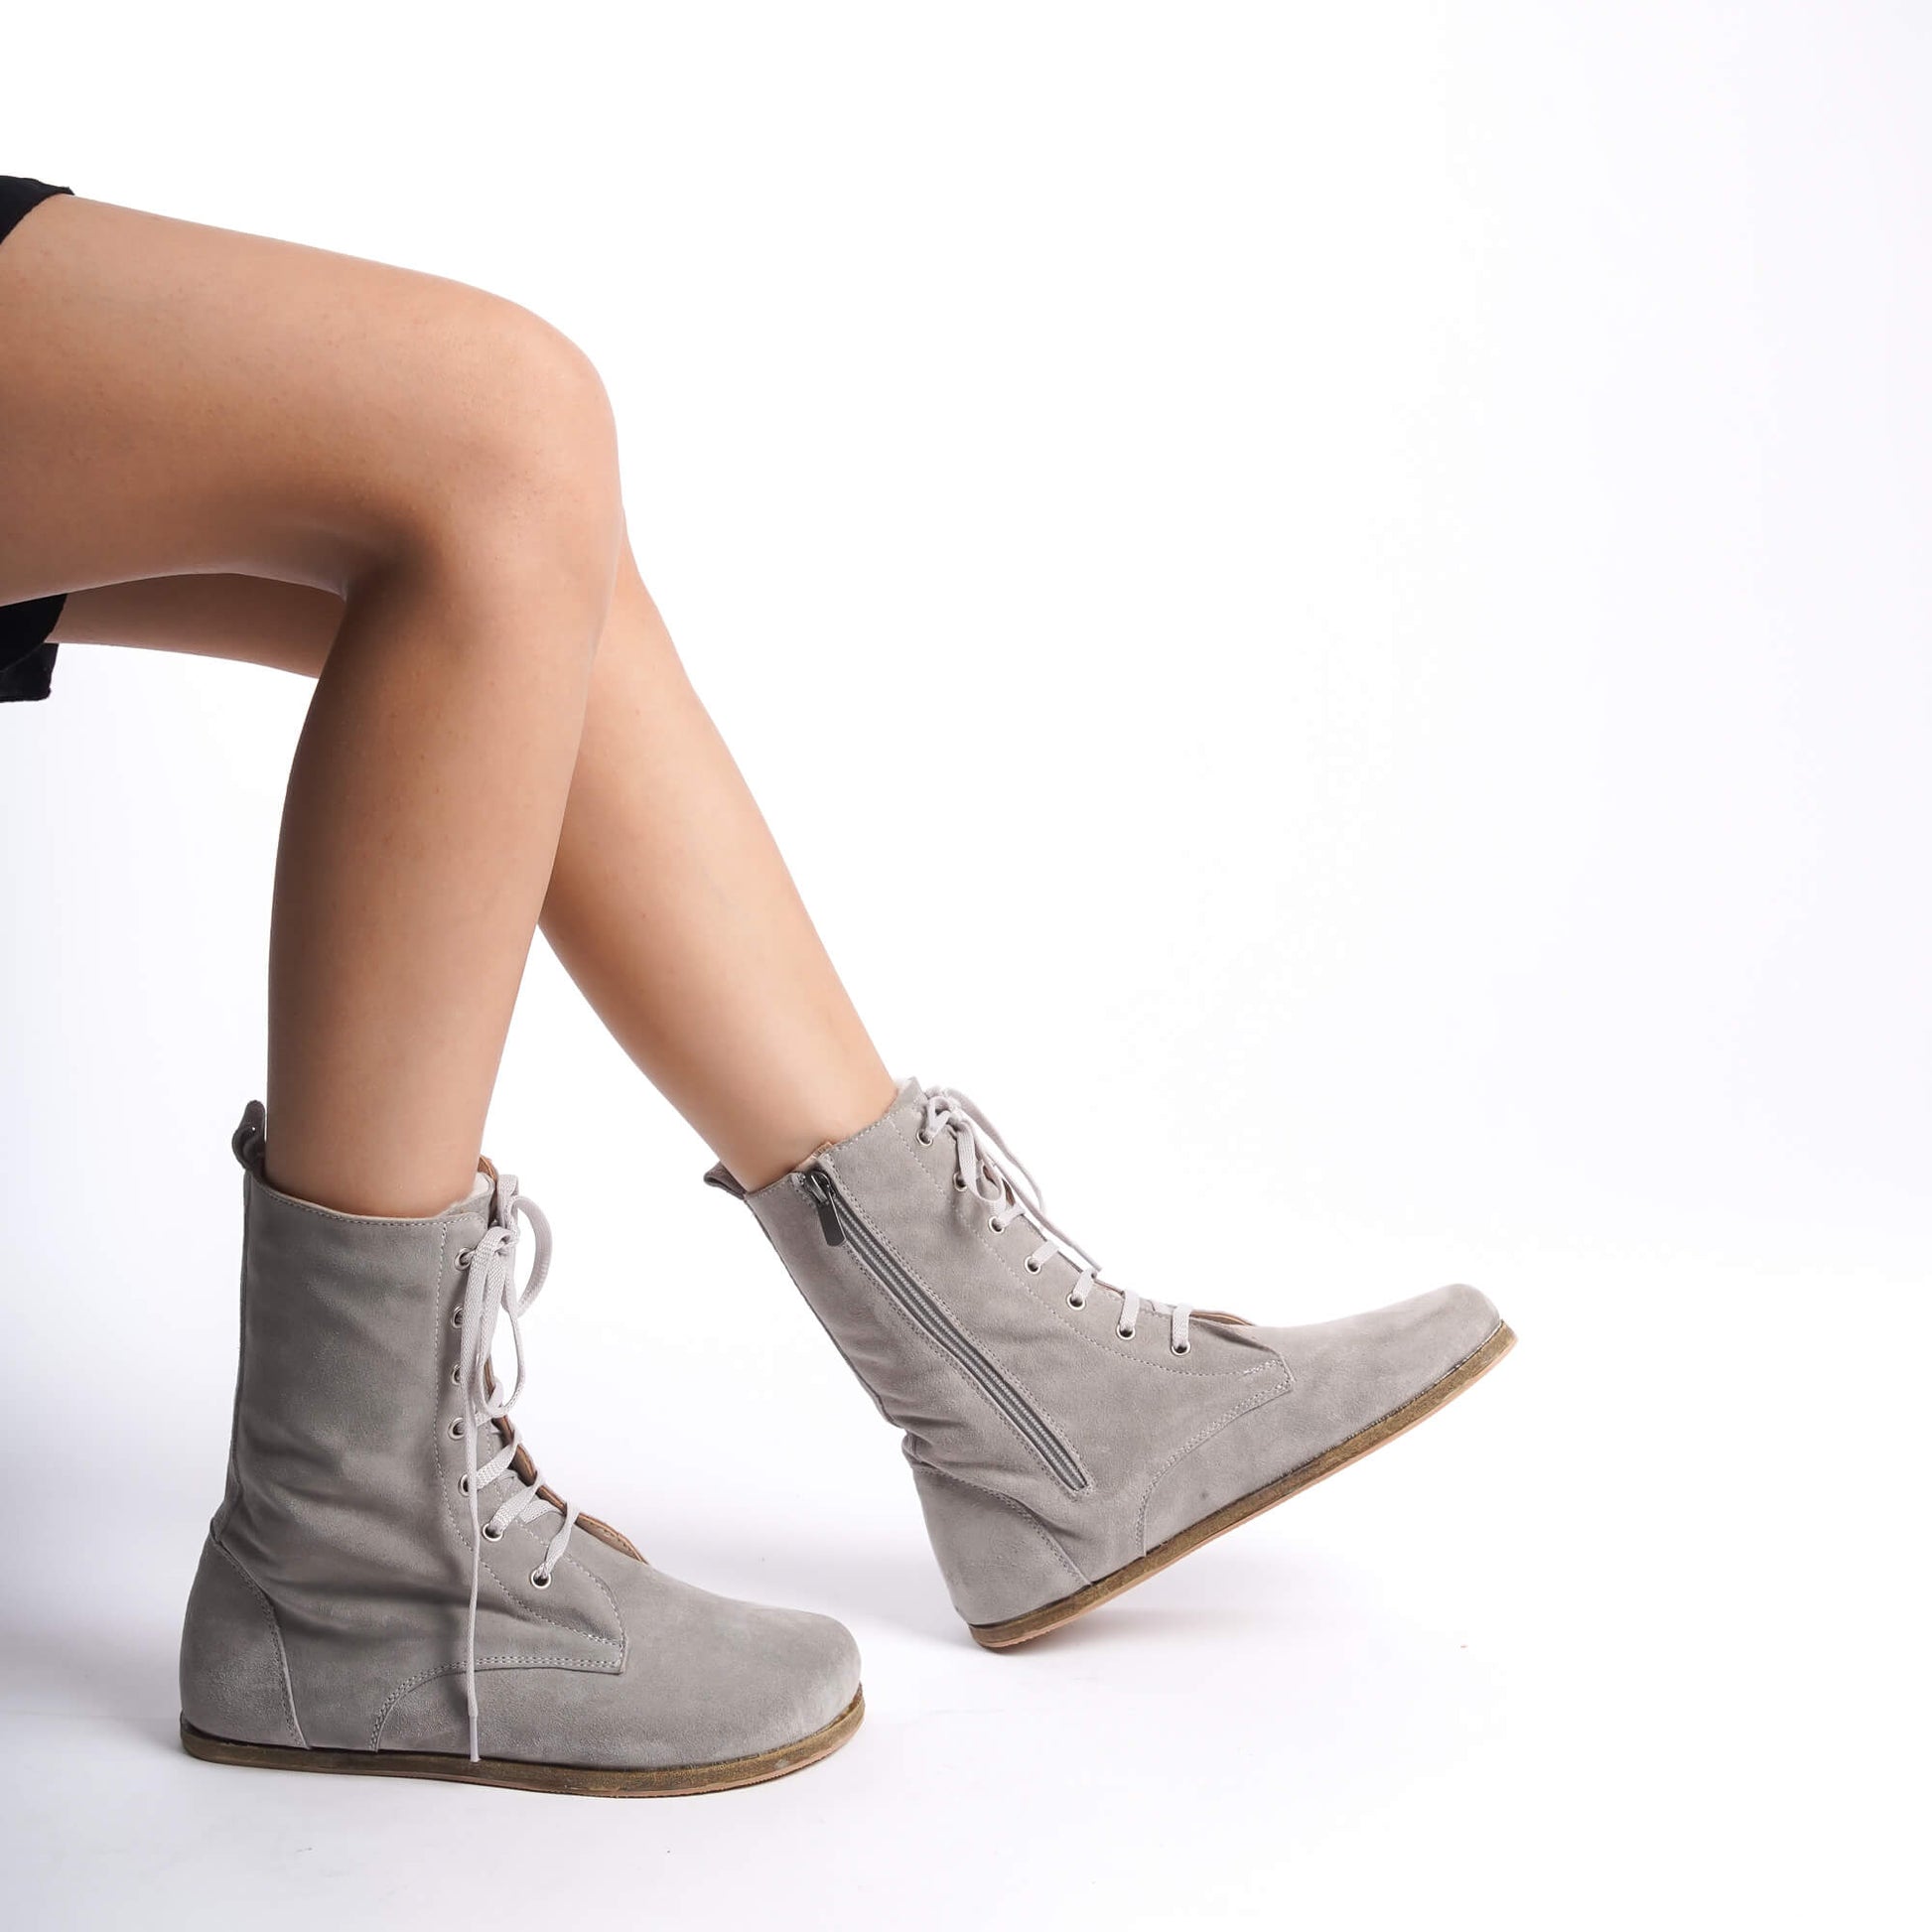 Gray suede women's boots crafted from genuine natural leather.